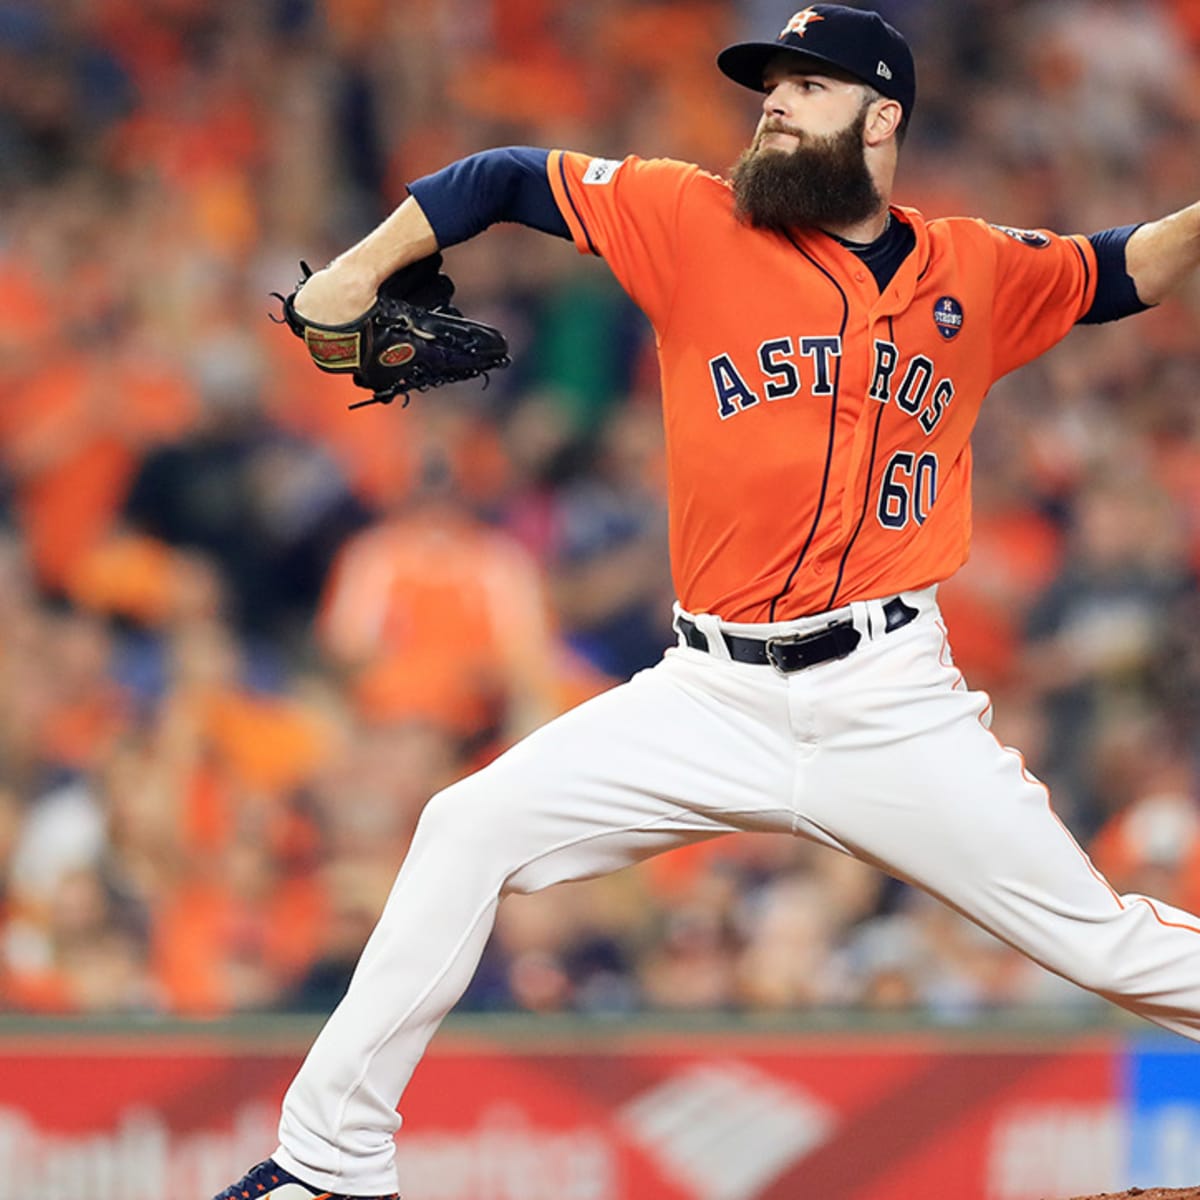 According to Dallas Keuchel, he's much better at video games than